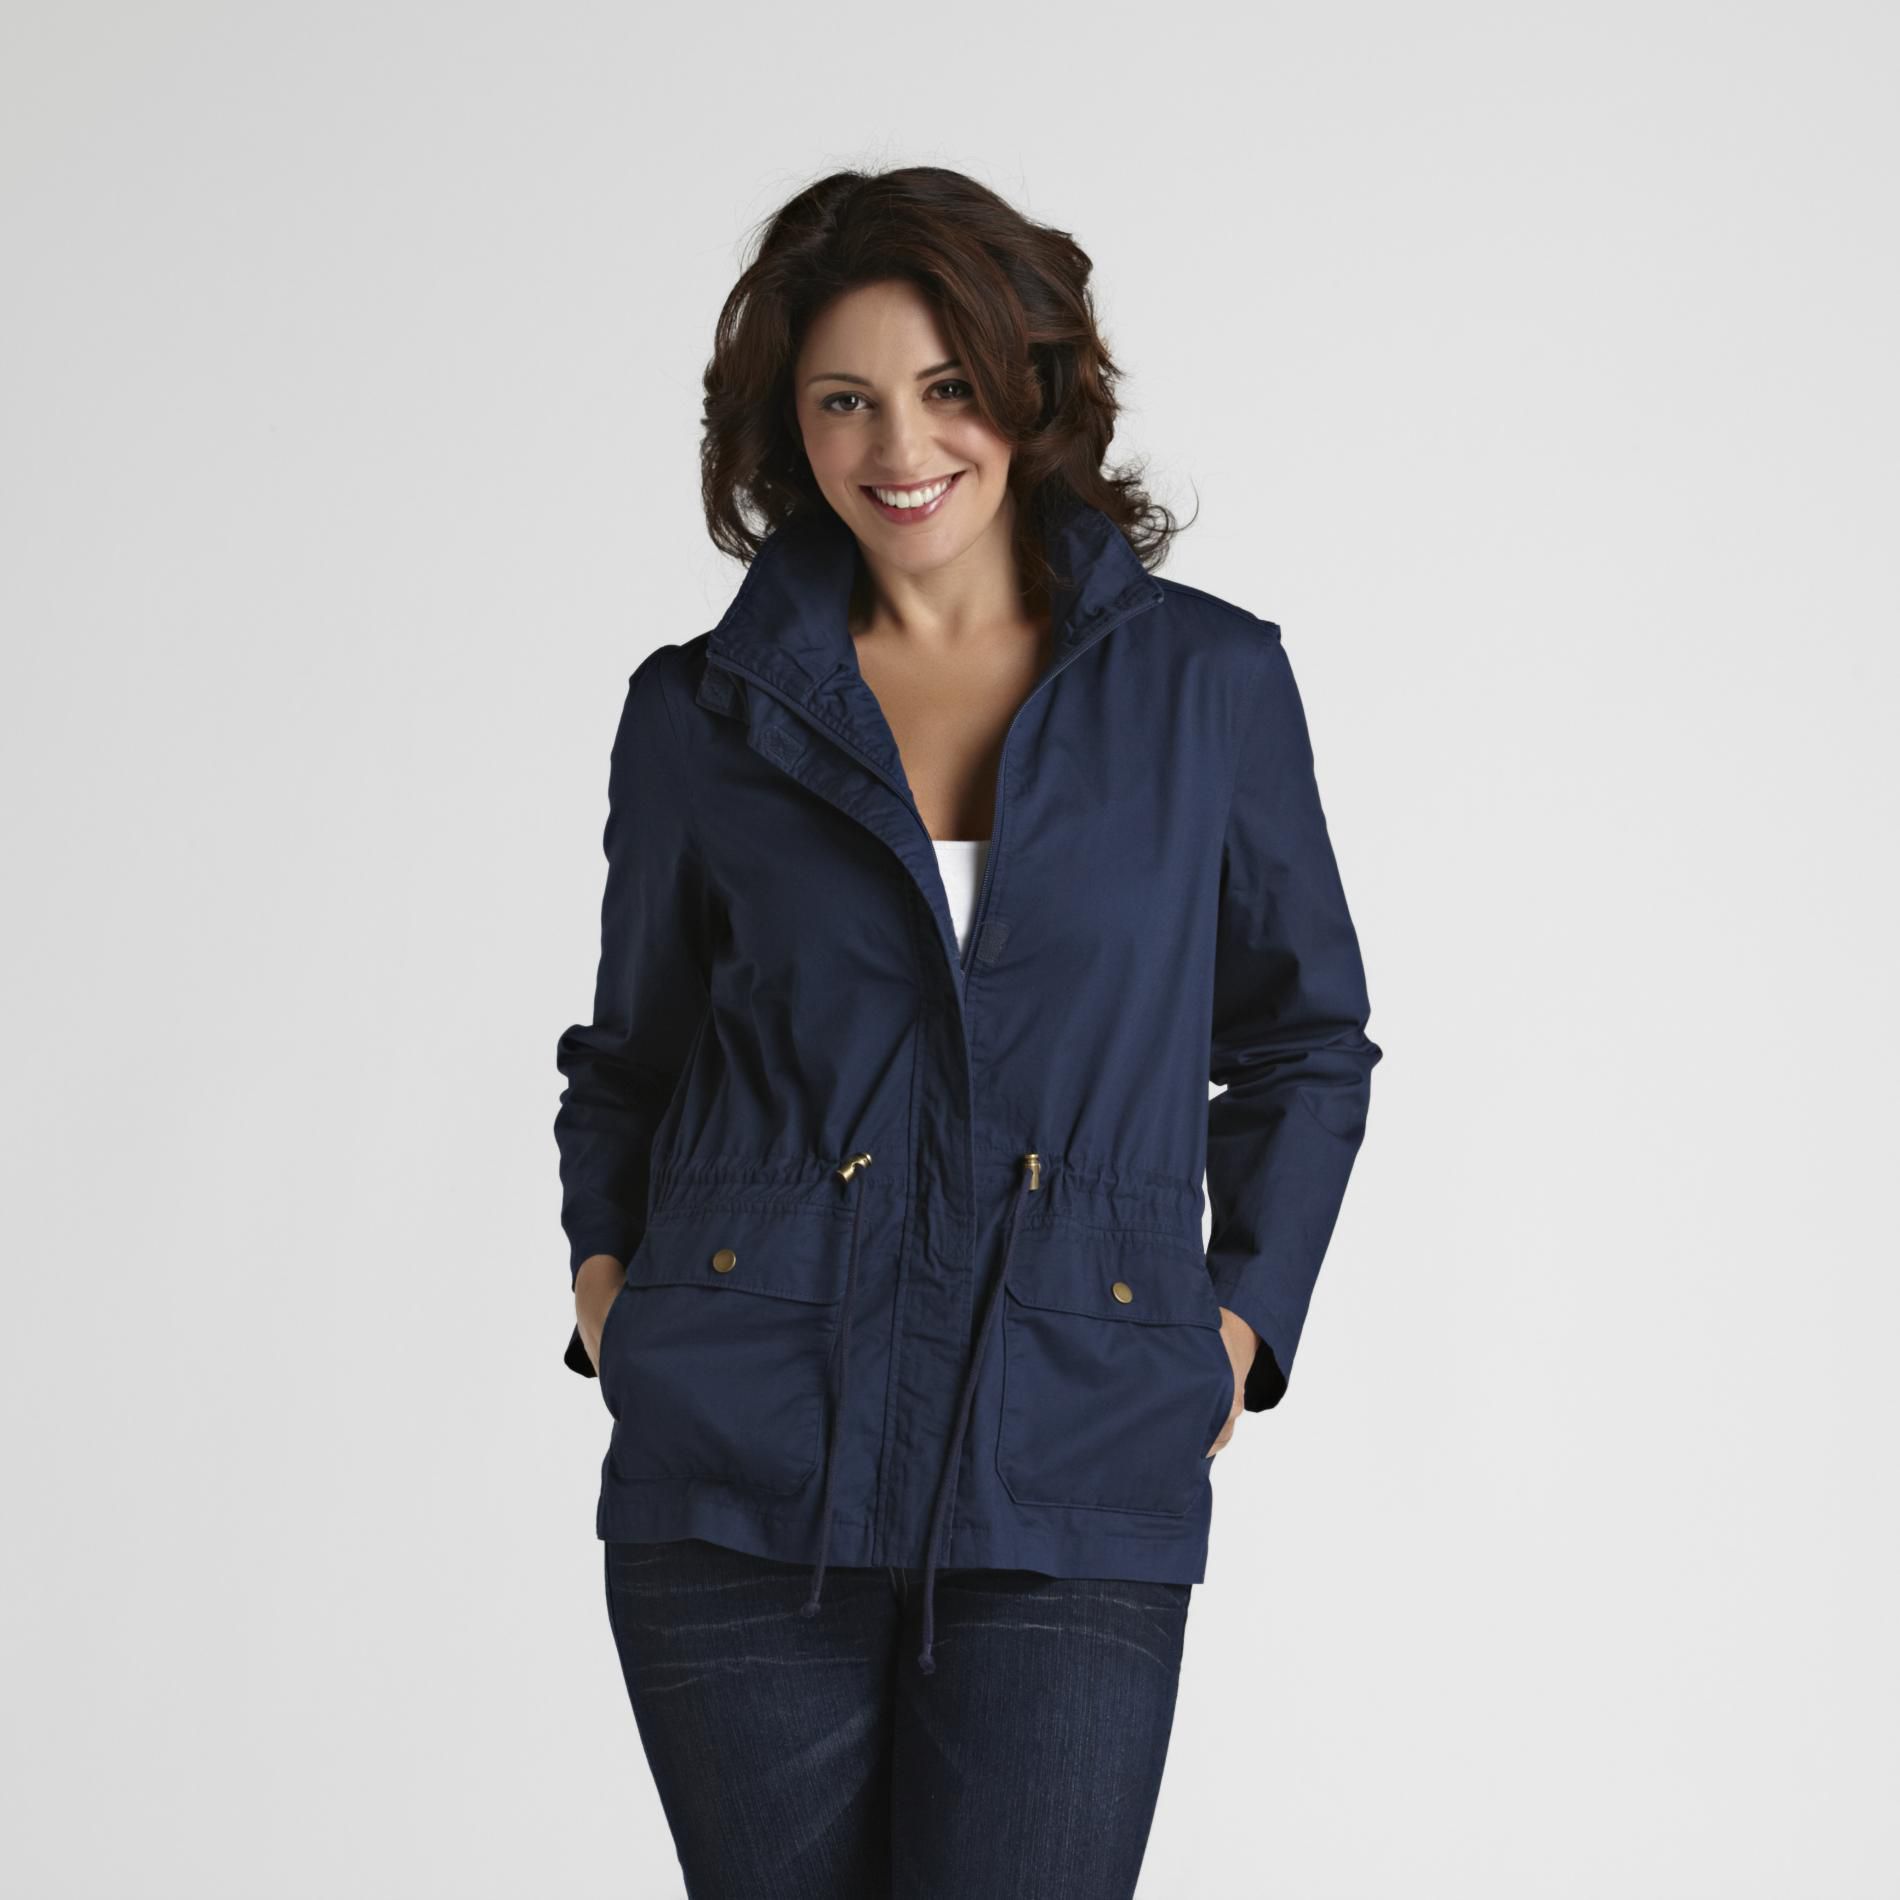 Basic Editions Women's Easy Care Jacket